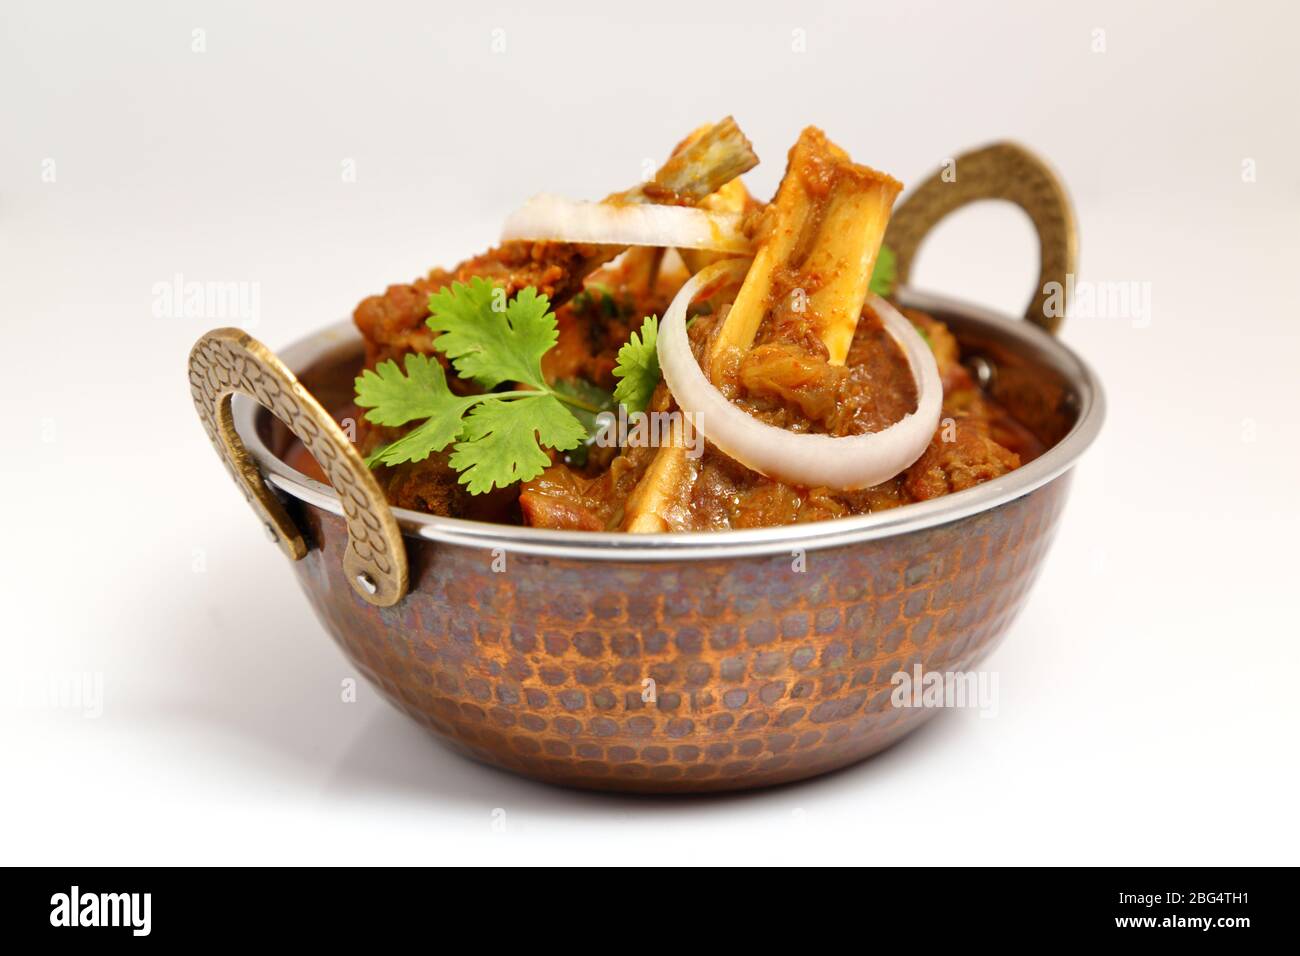 Indian style meat dish or mutton curry Stock Photo